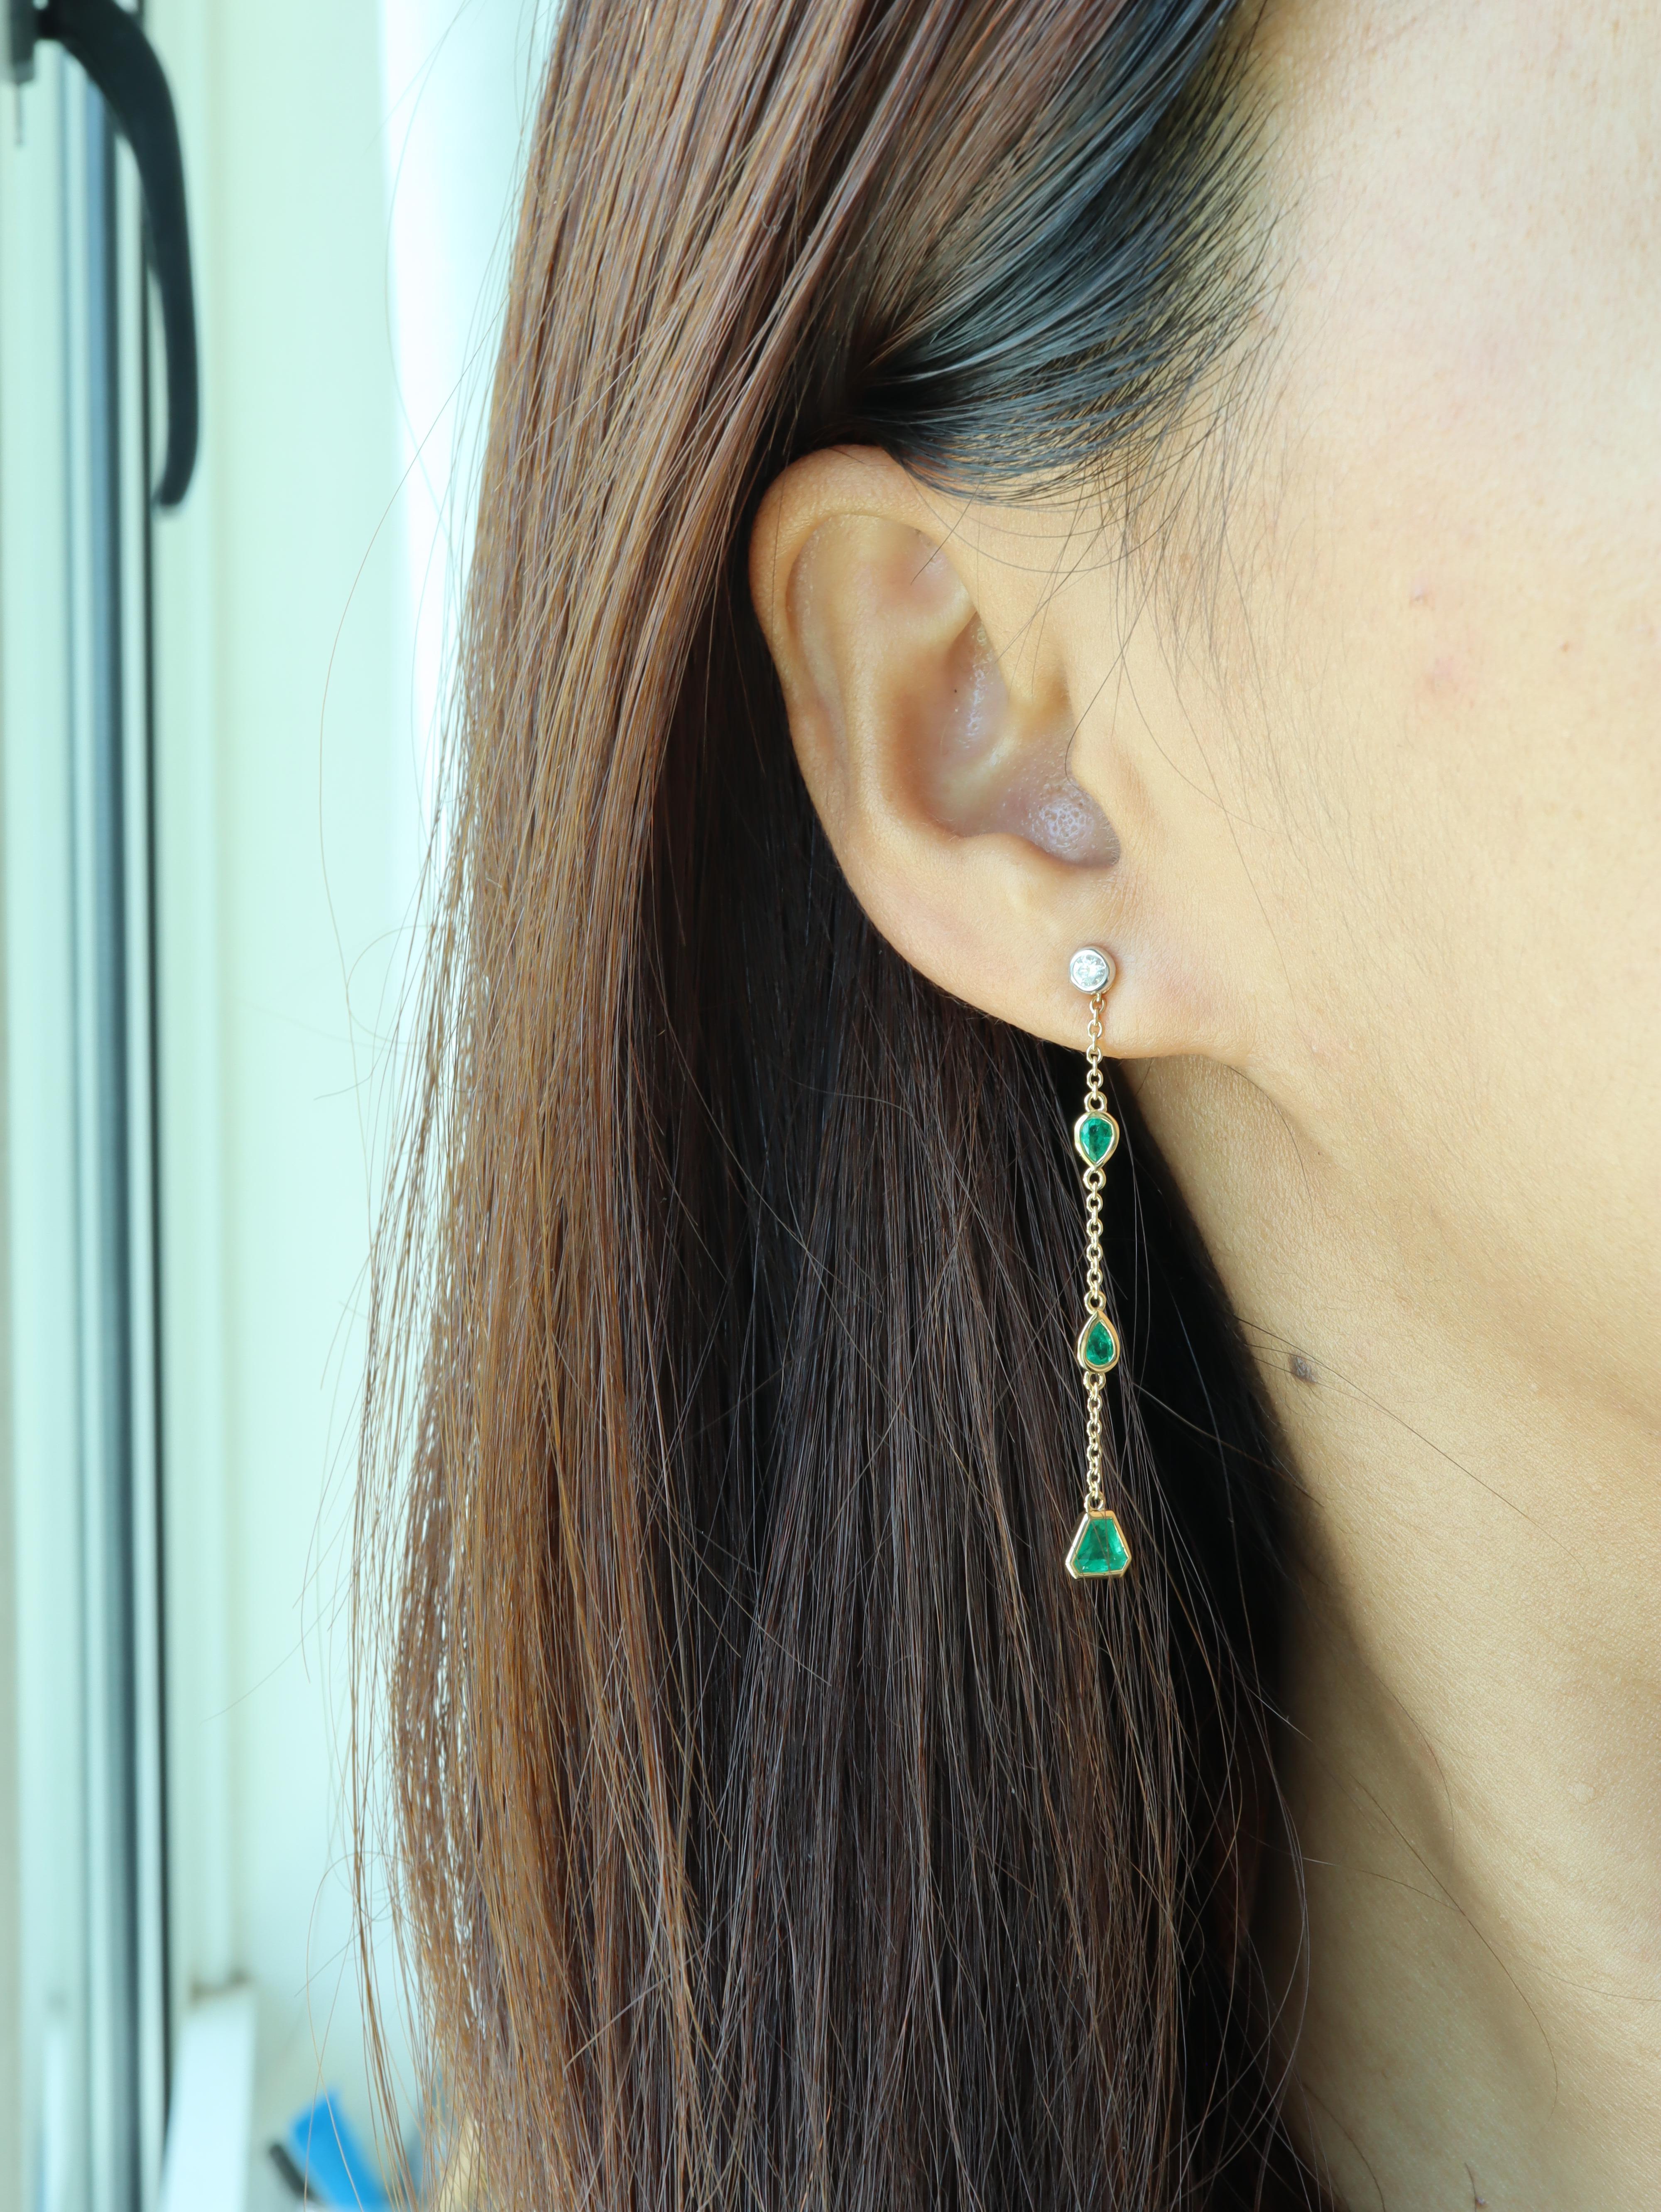 This Colombian emerald earring enhancer act as style boosters for your stud earrings or small huggie hoops. Attention is paid to detail, resulting in a clean and classy appearance. Whether you’re aiming for a casual look or dressing up for a special